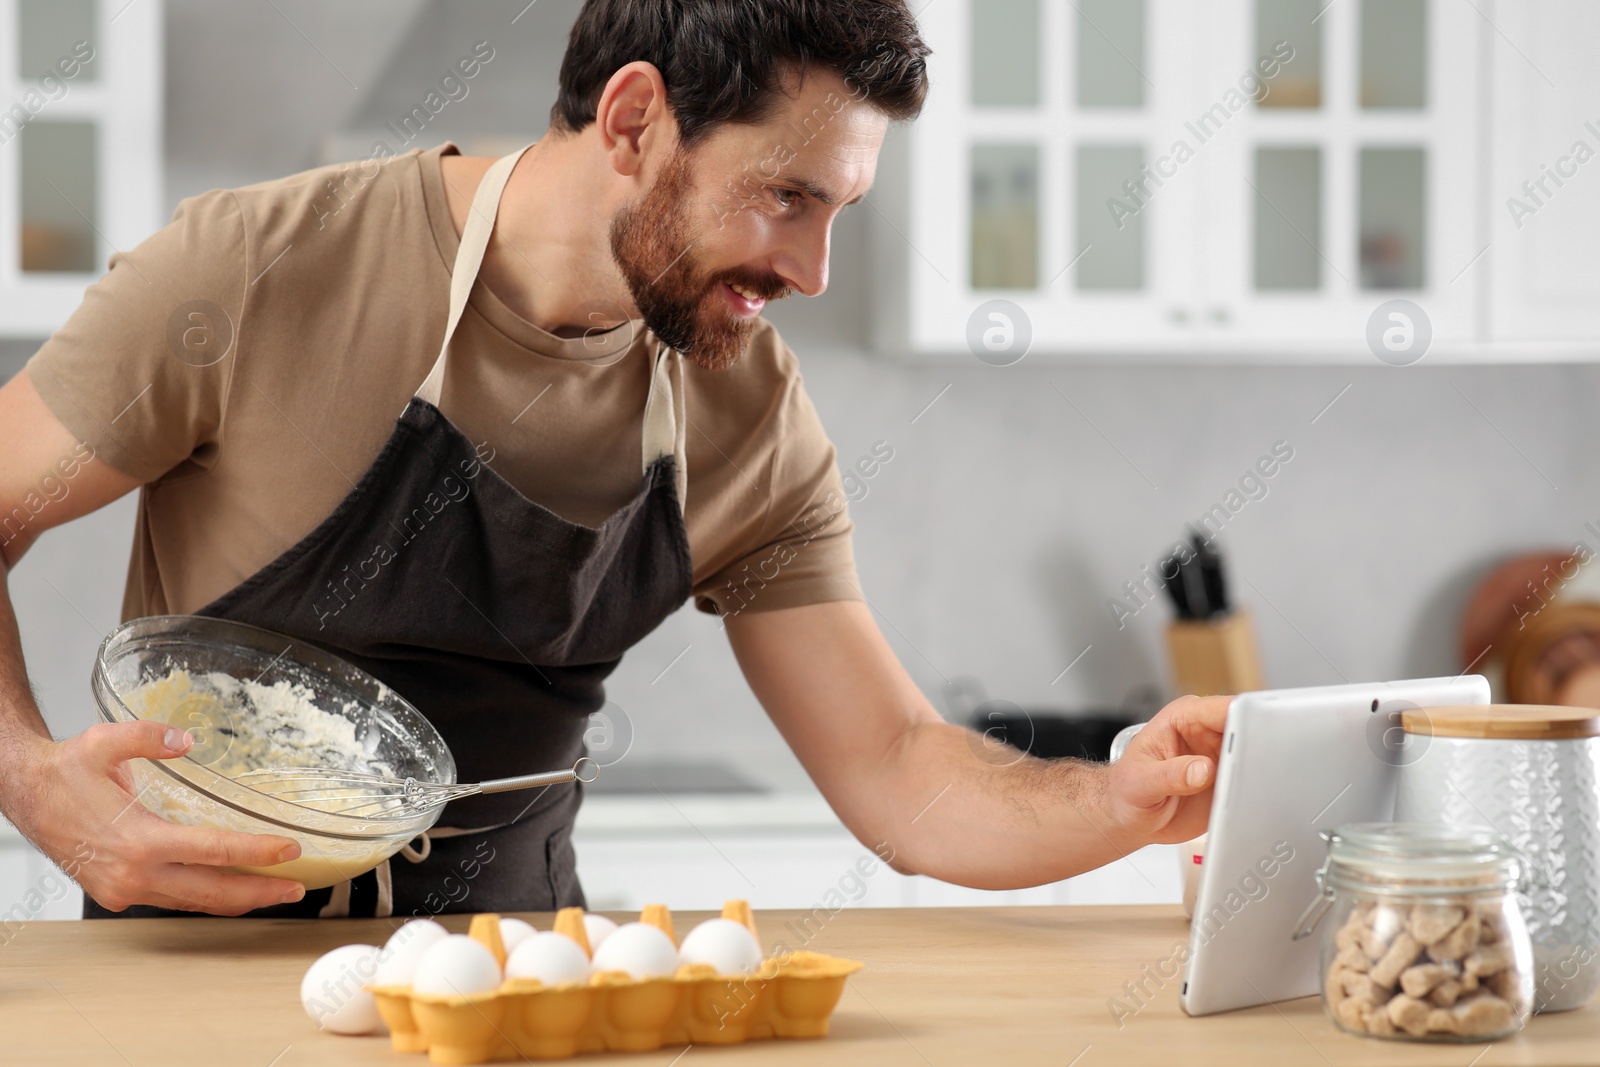 Photo of Man making dough while watching online cooking course via tablet in kitchen